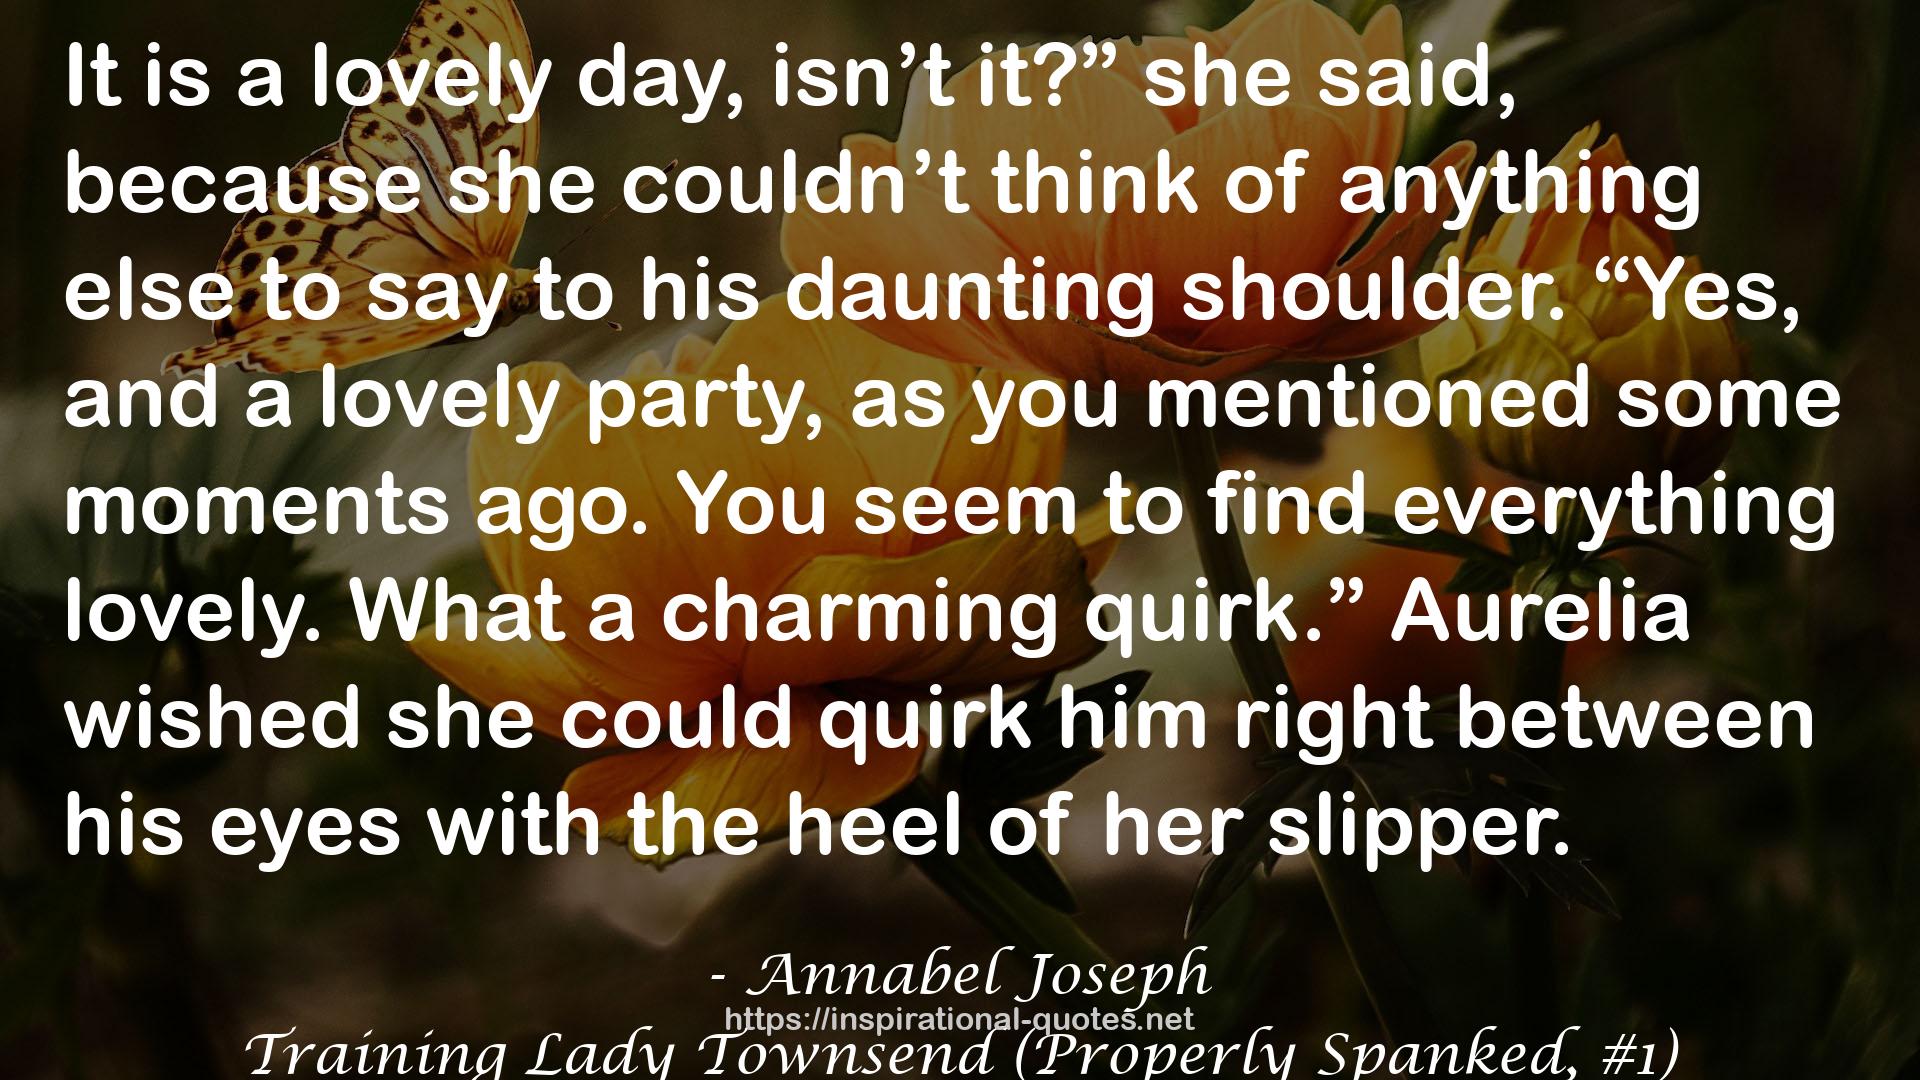 Training Lady Townsend (Properly Spanked, #1) QUOTES